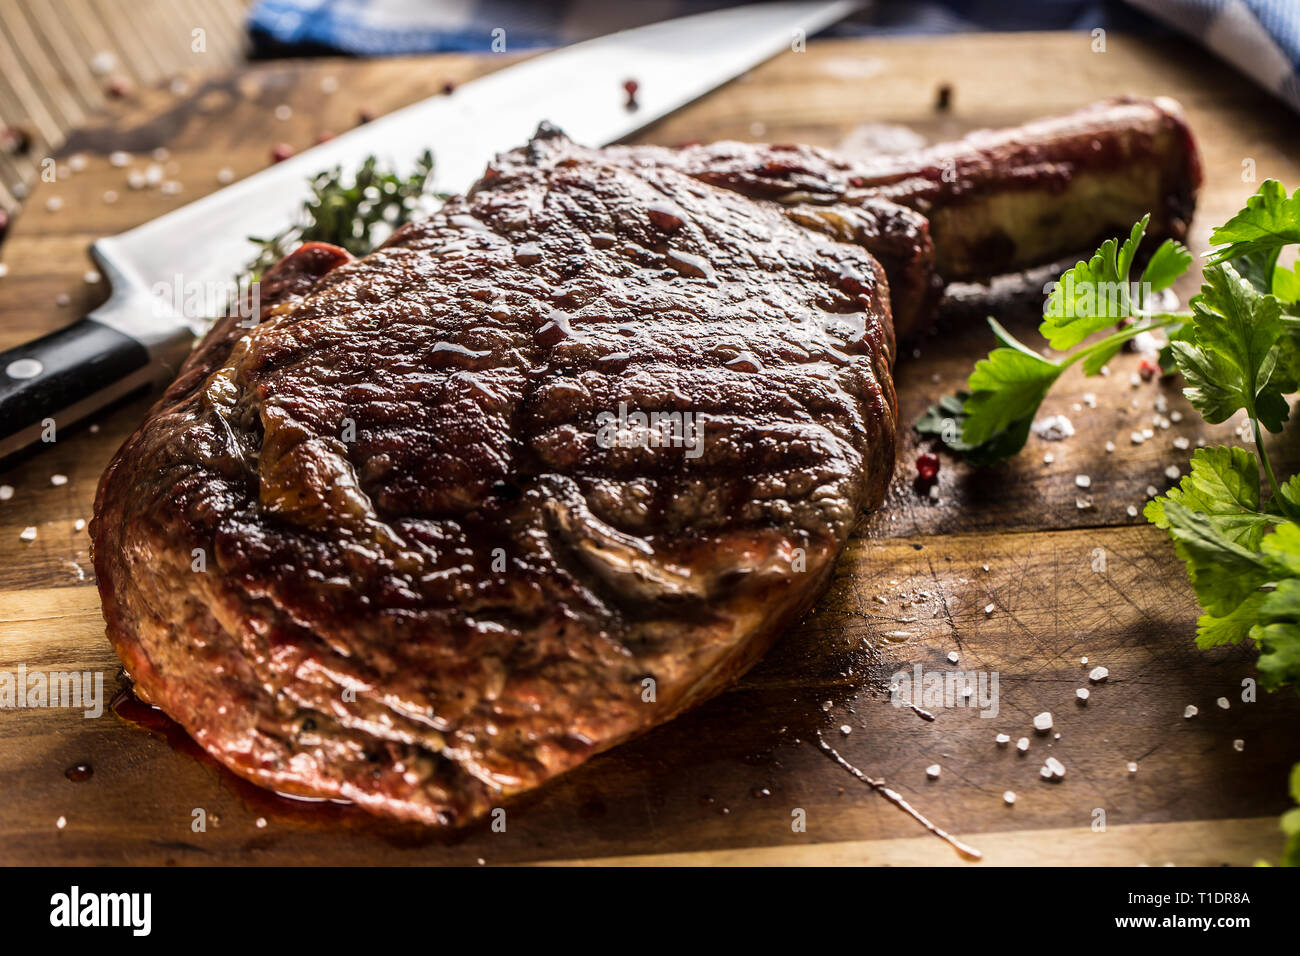 Freshly grilled tomahawk steak on slate plate with salt pepper rosemary and parsley herbs. Stock Photo